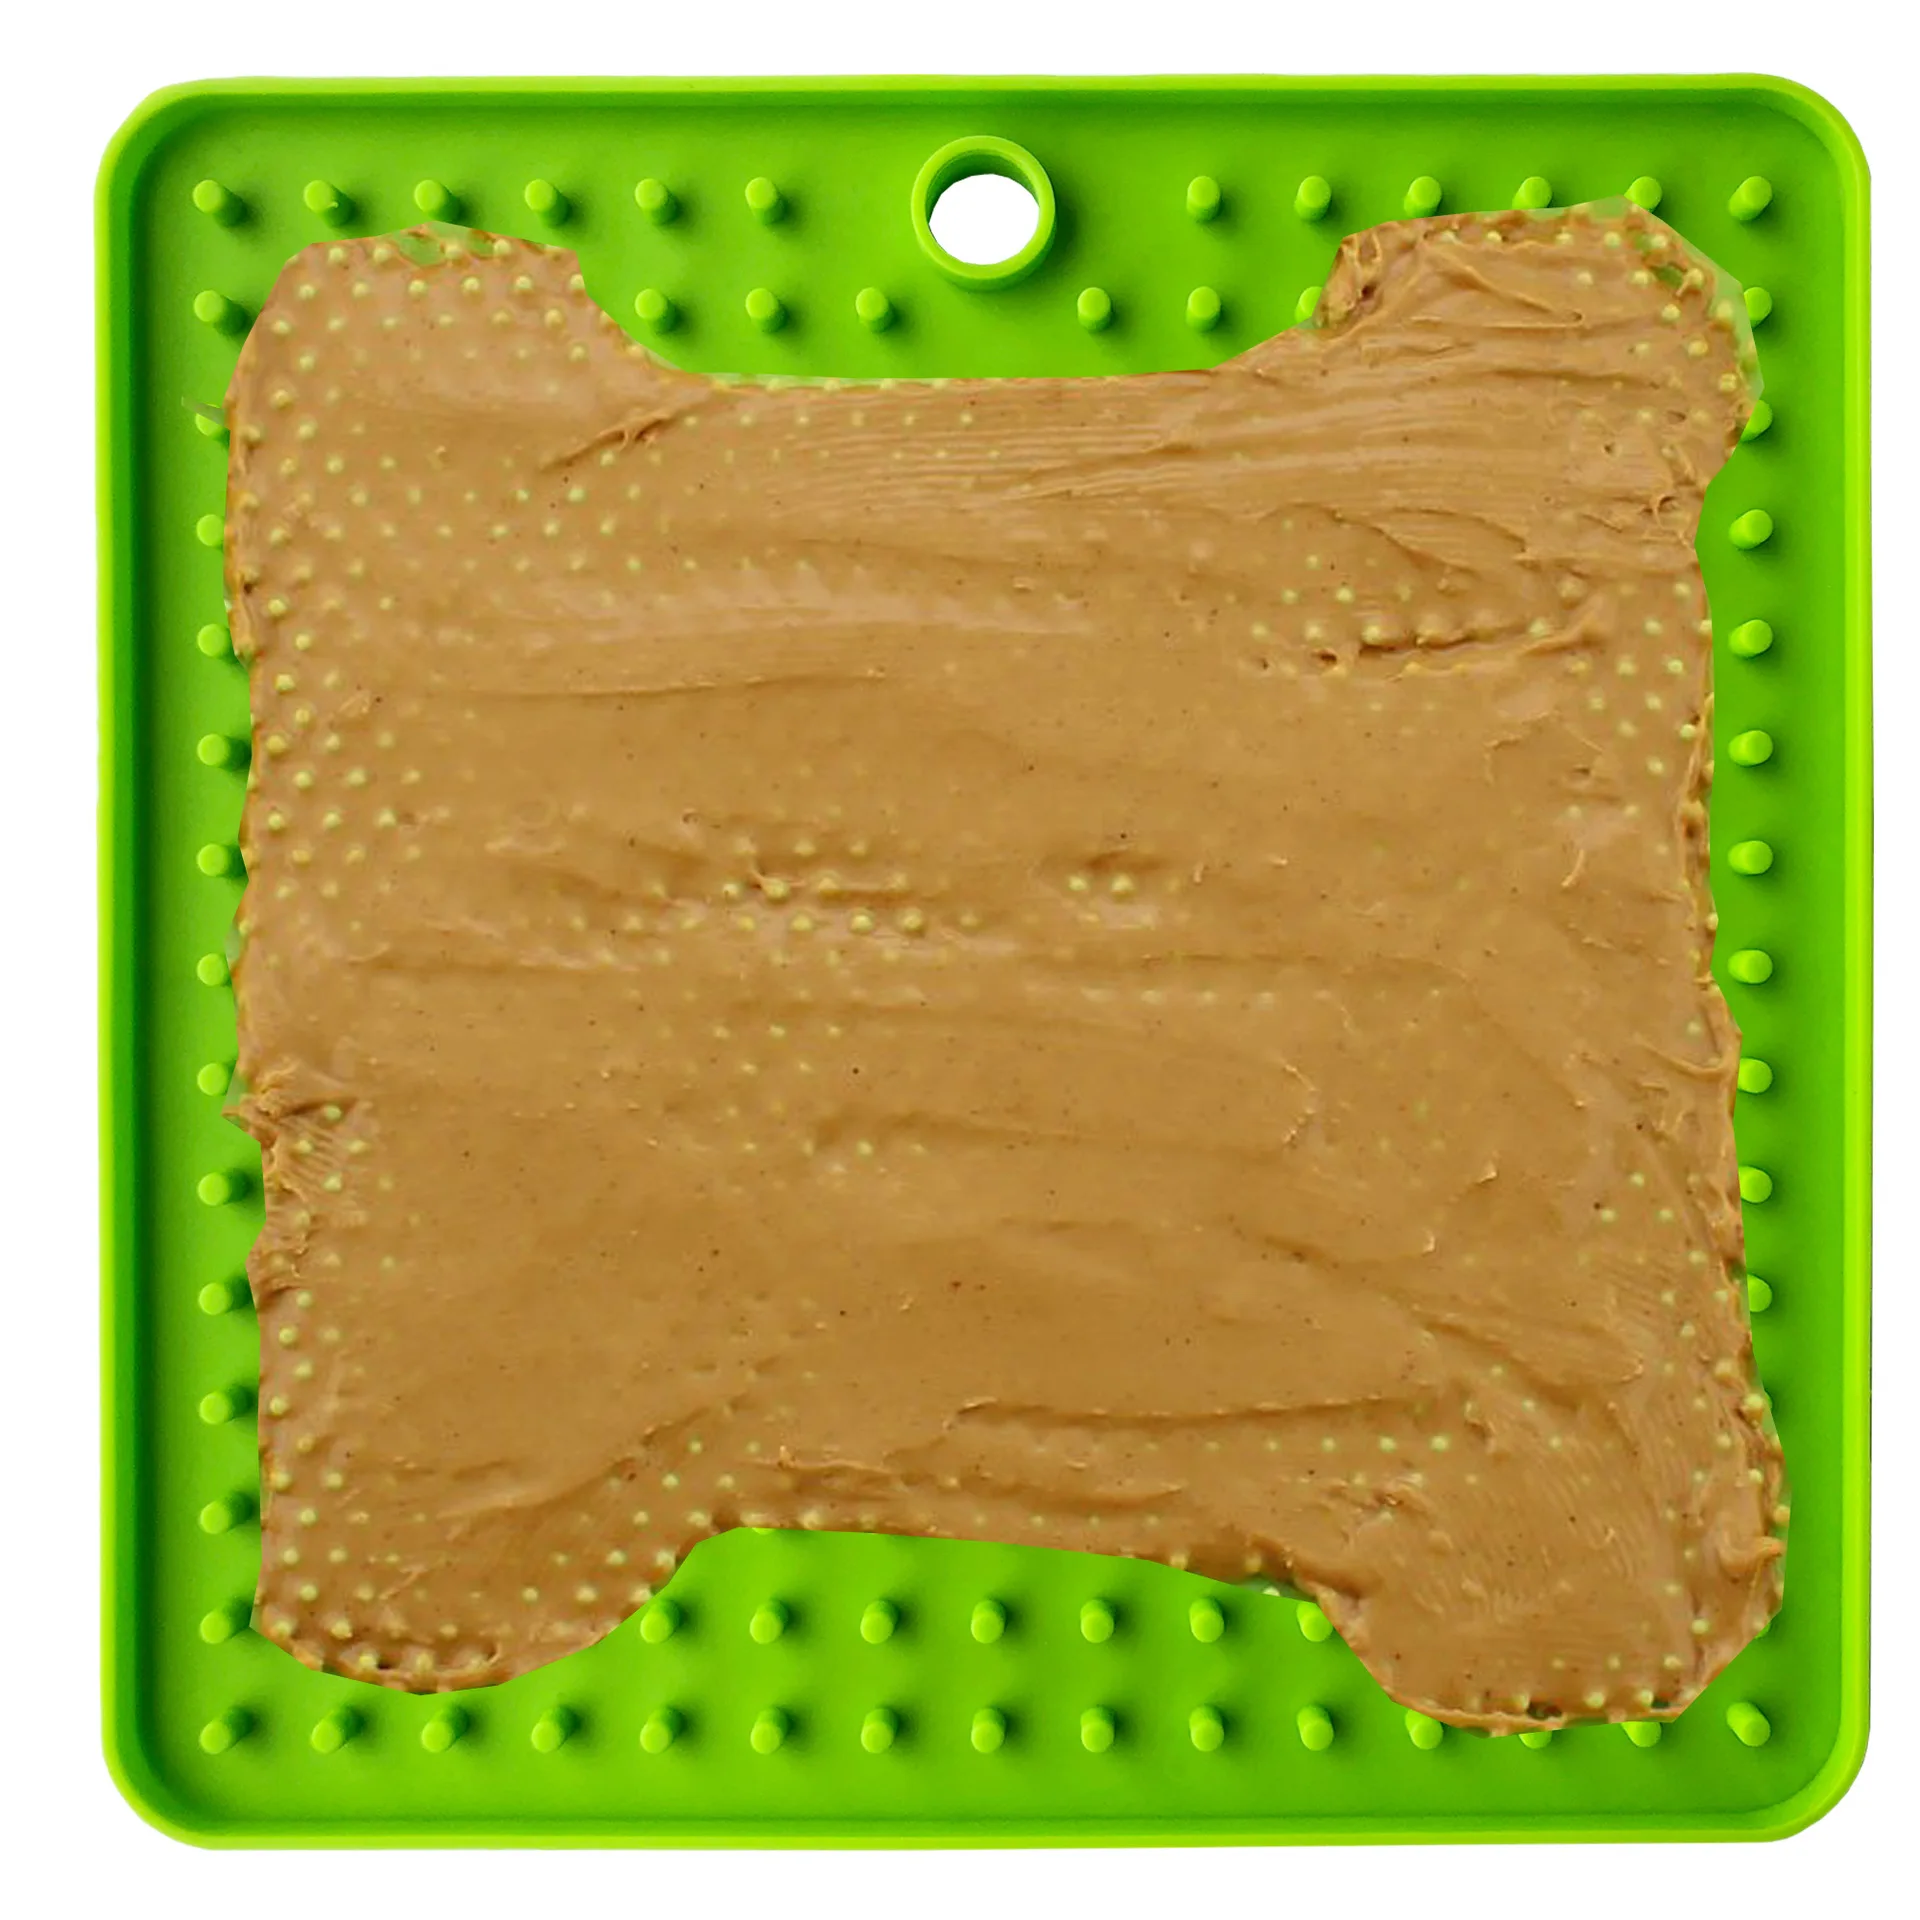 

Mat for Dog Feeding Silicone Pad Slow Feeder Food Bowl Dispensing Perfect for Treats Butter Yogurt Peanut Funny Pet Supplies